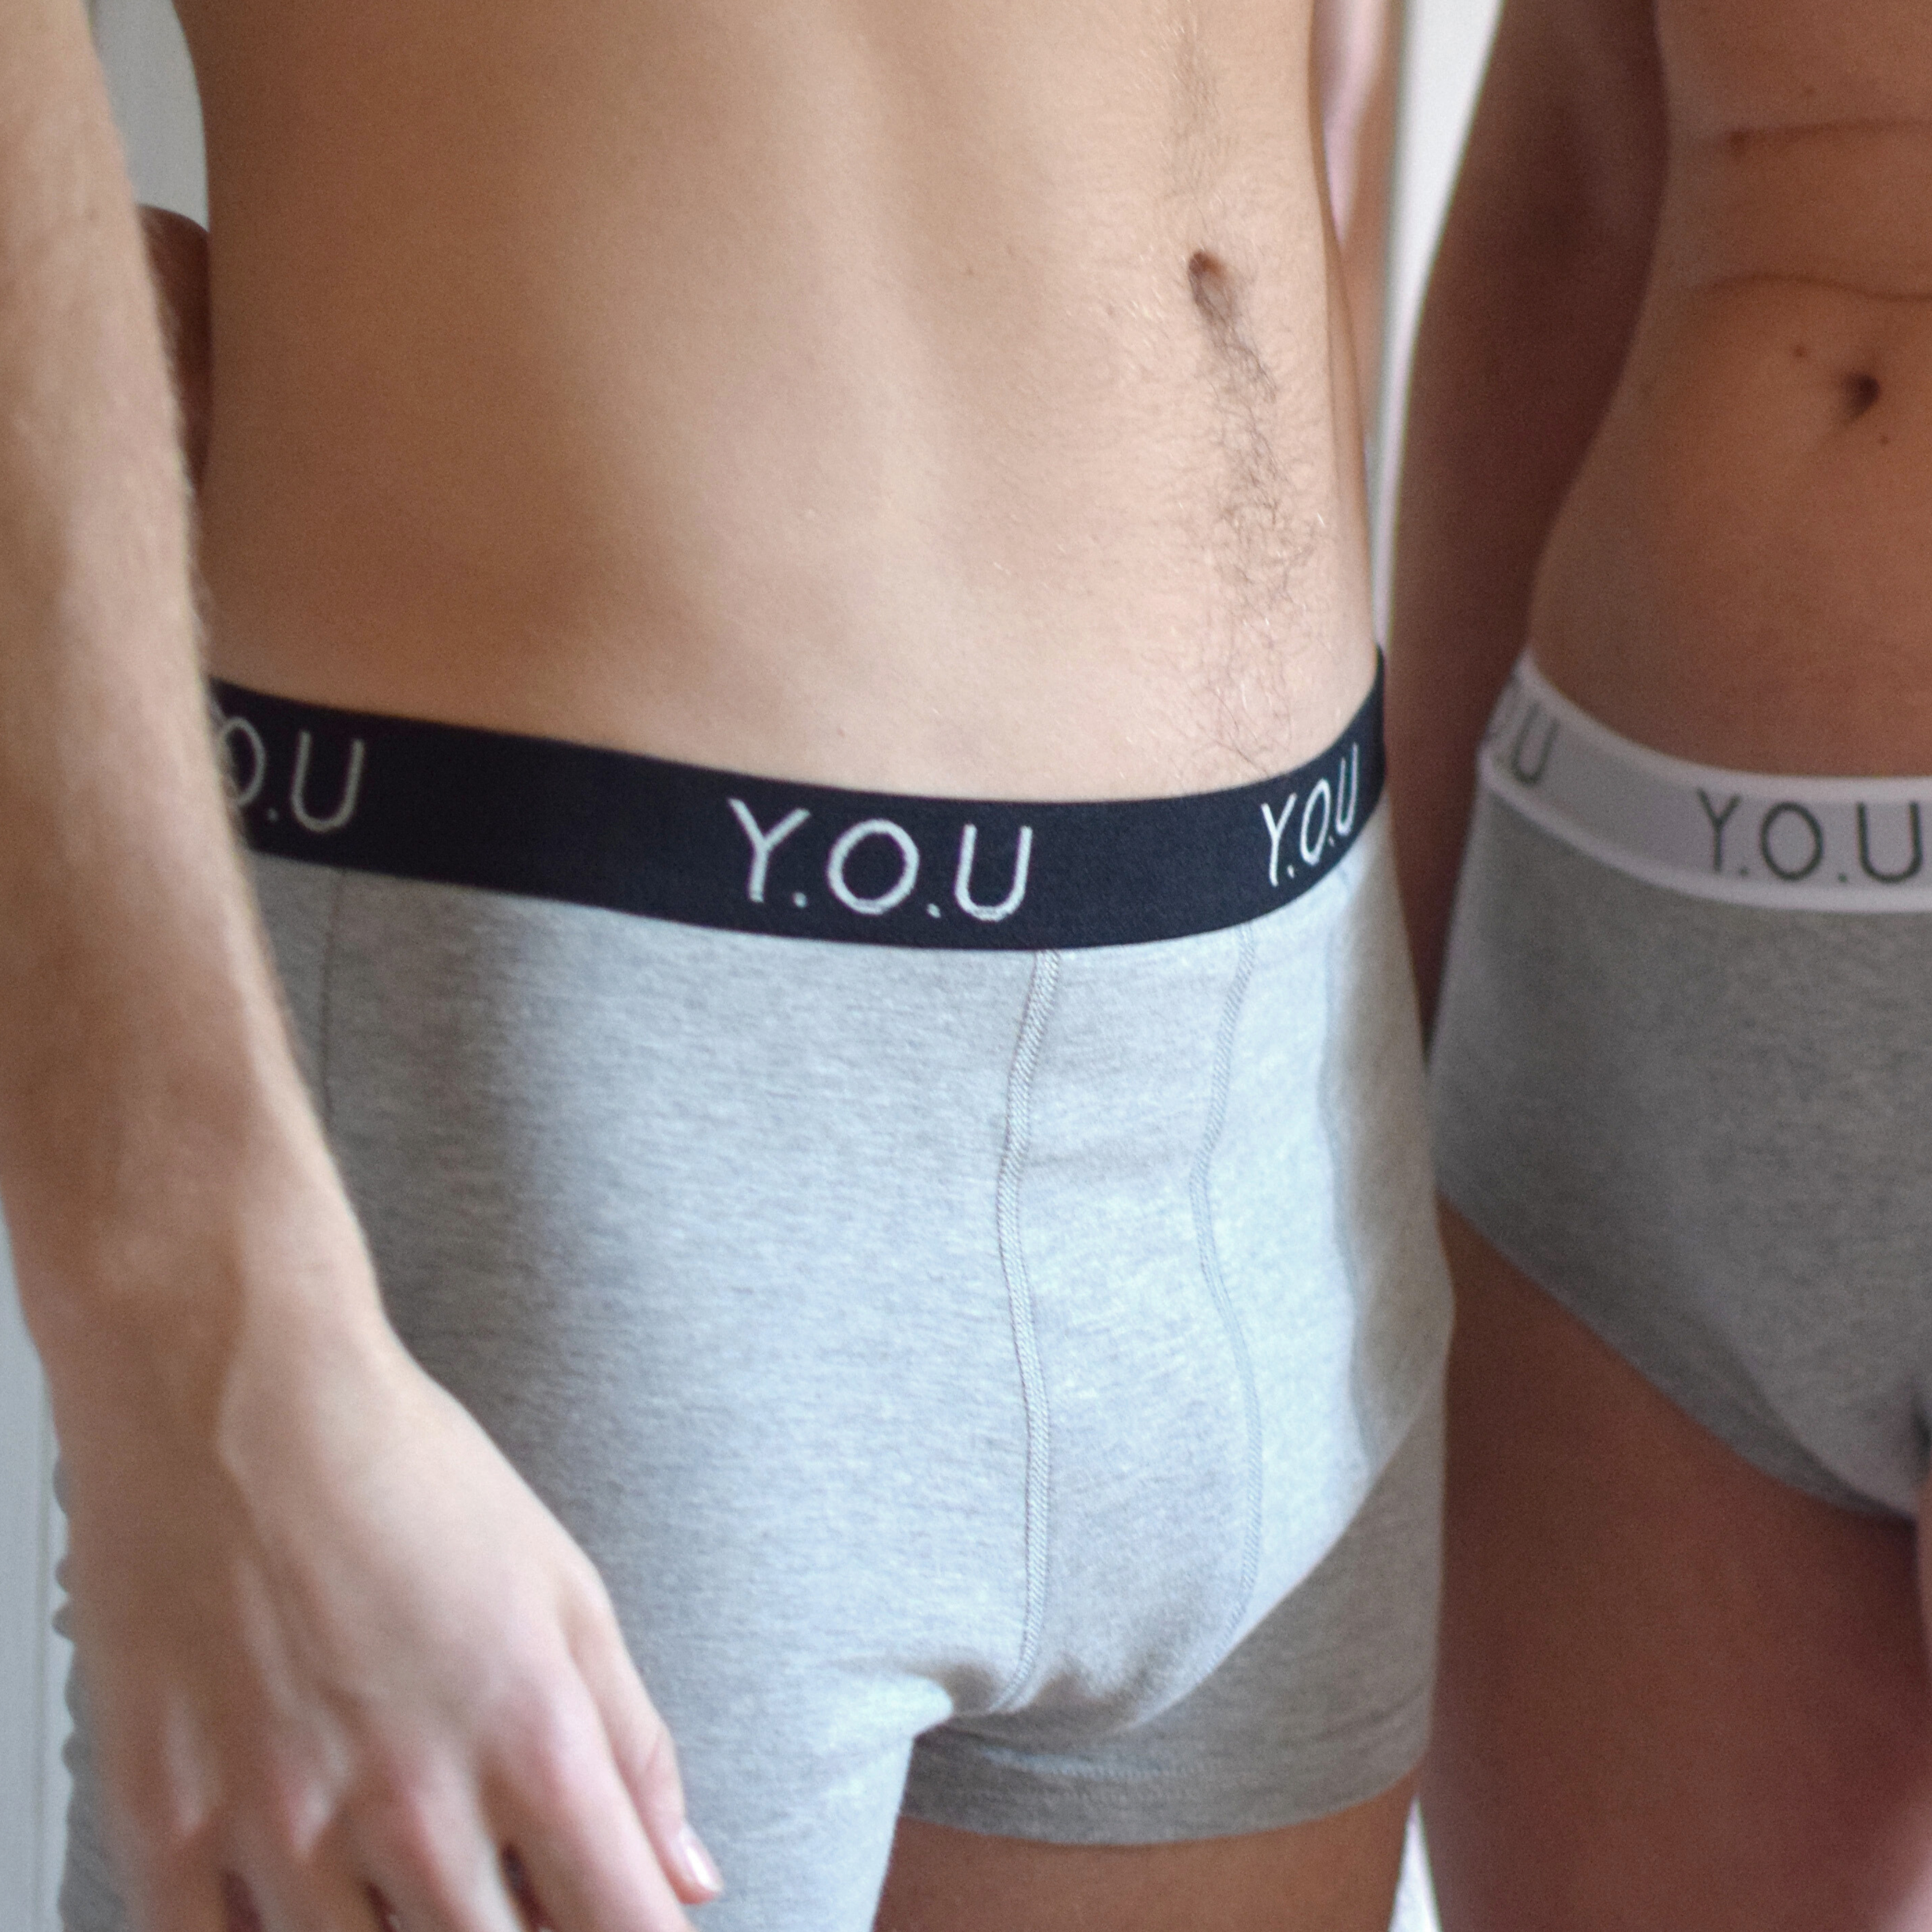 Close-up of two individuals wearing light grey underwear with black waistbands showing the text "Y.O.U" in white. The focus is on the torso and waist area from a side angle, with partial views of their arms and upper thighs, highlighting these  men's hipster trunks.